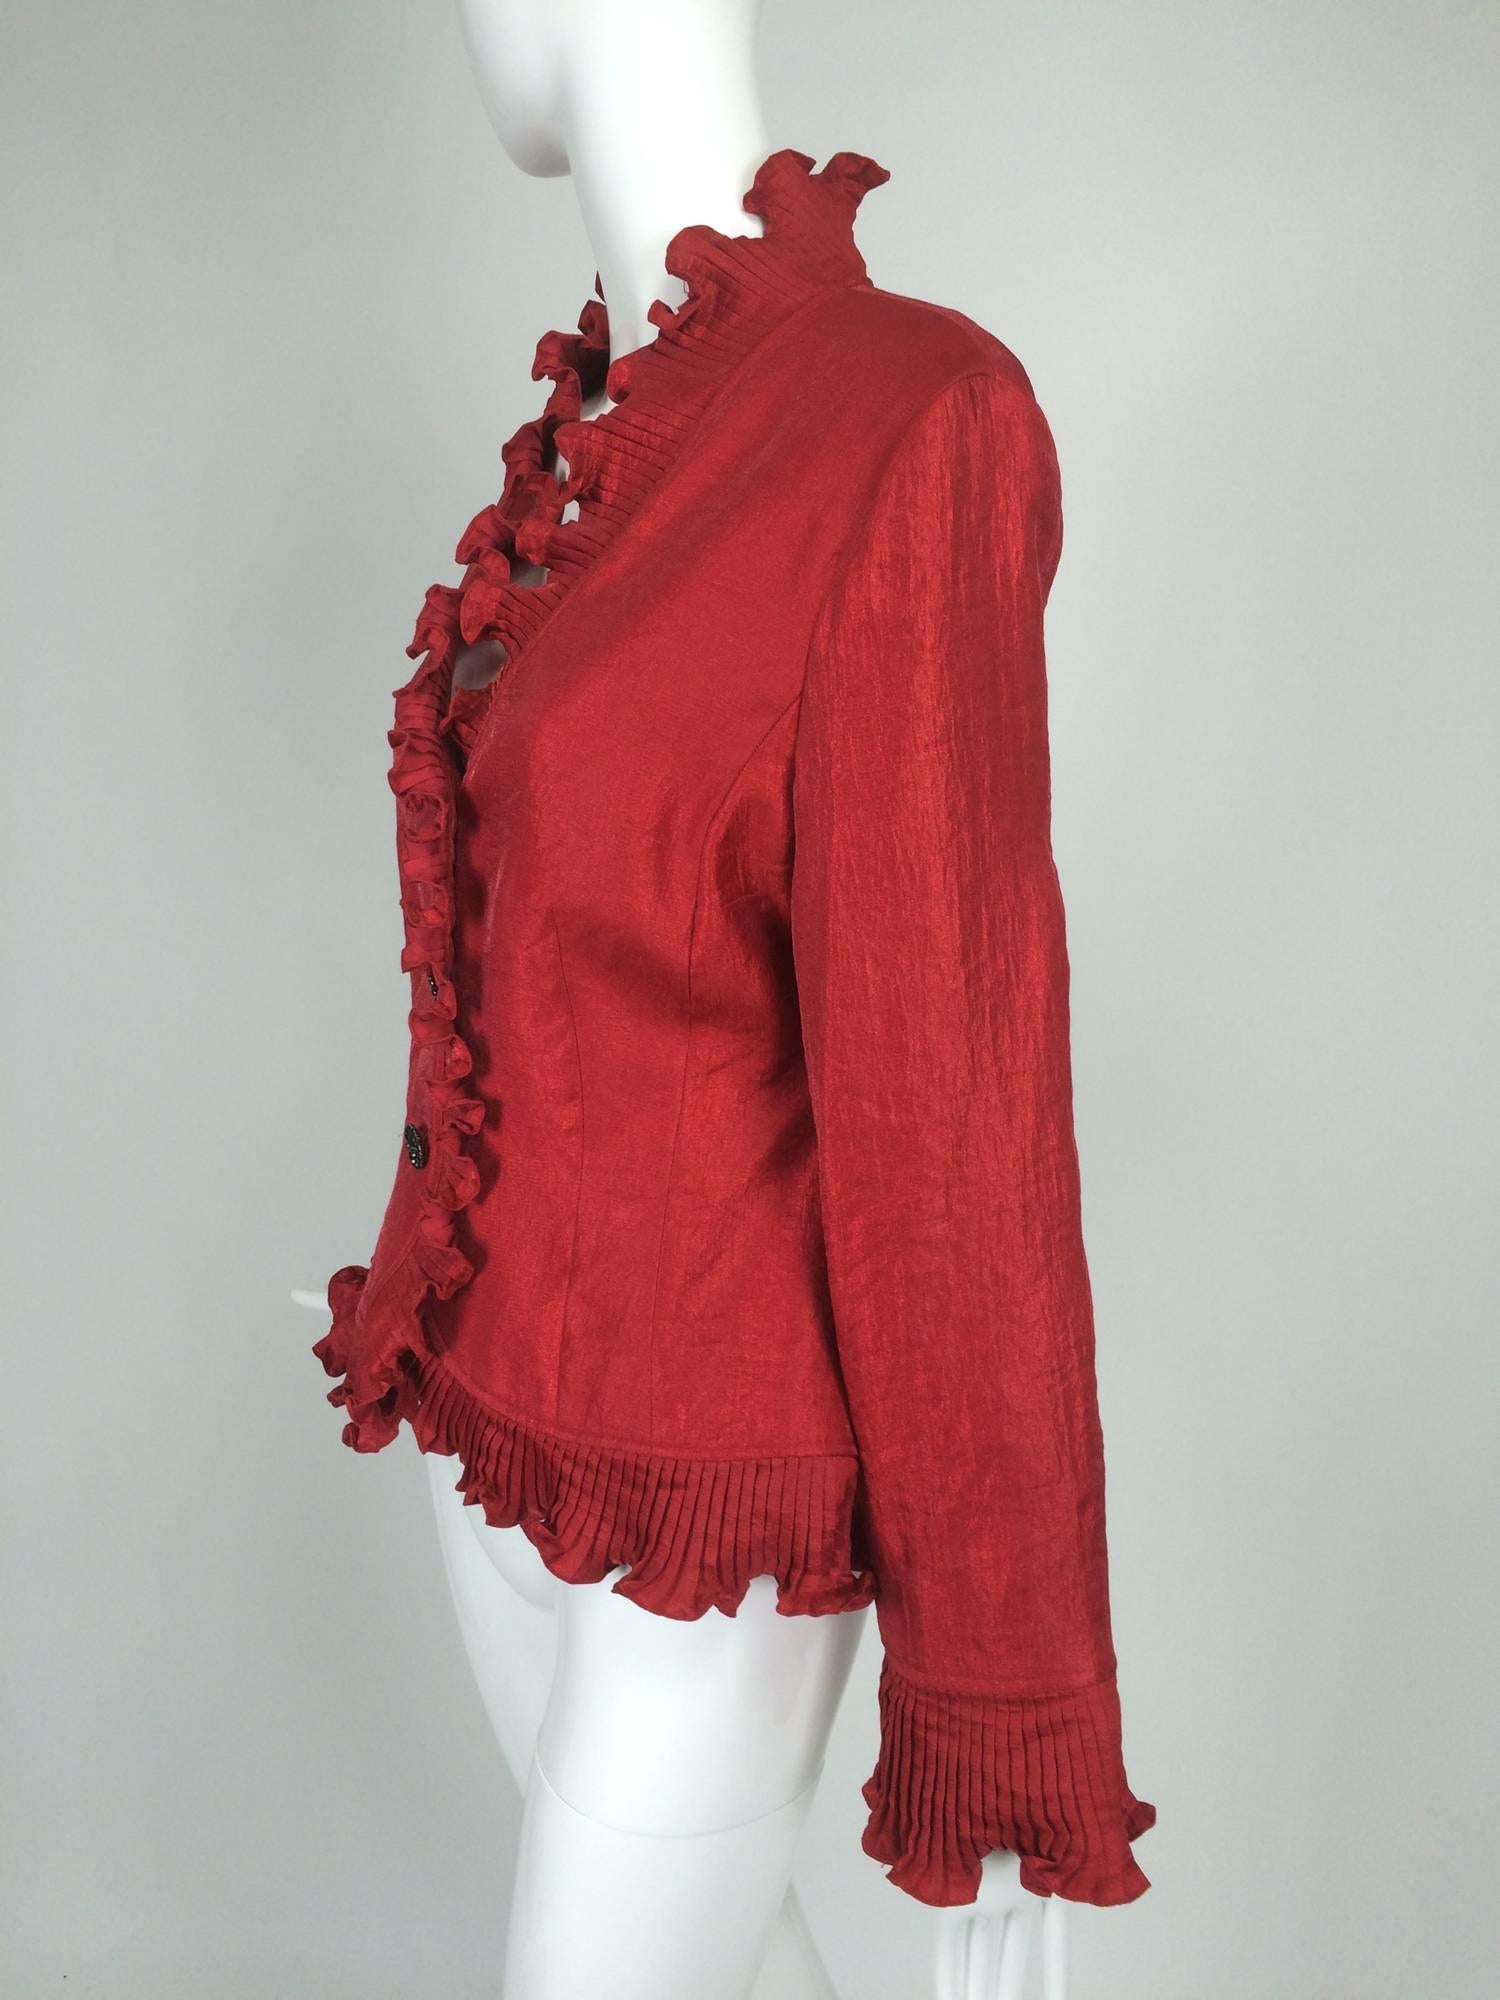 Victor Costa shimmery red evening jacket with pleated ruffle trims...Button front jacket closes with round multi black rhinestone buttons...Accordion pleated ruffle at all facings...Jacket has a V neckline...Long sleeves...Hip length...Fully lined